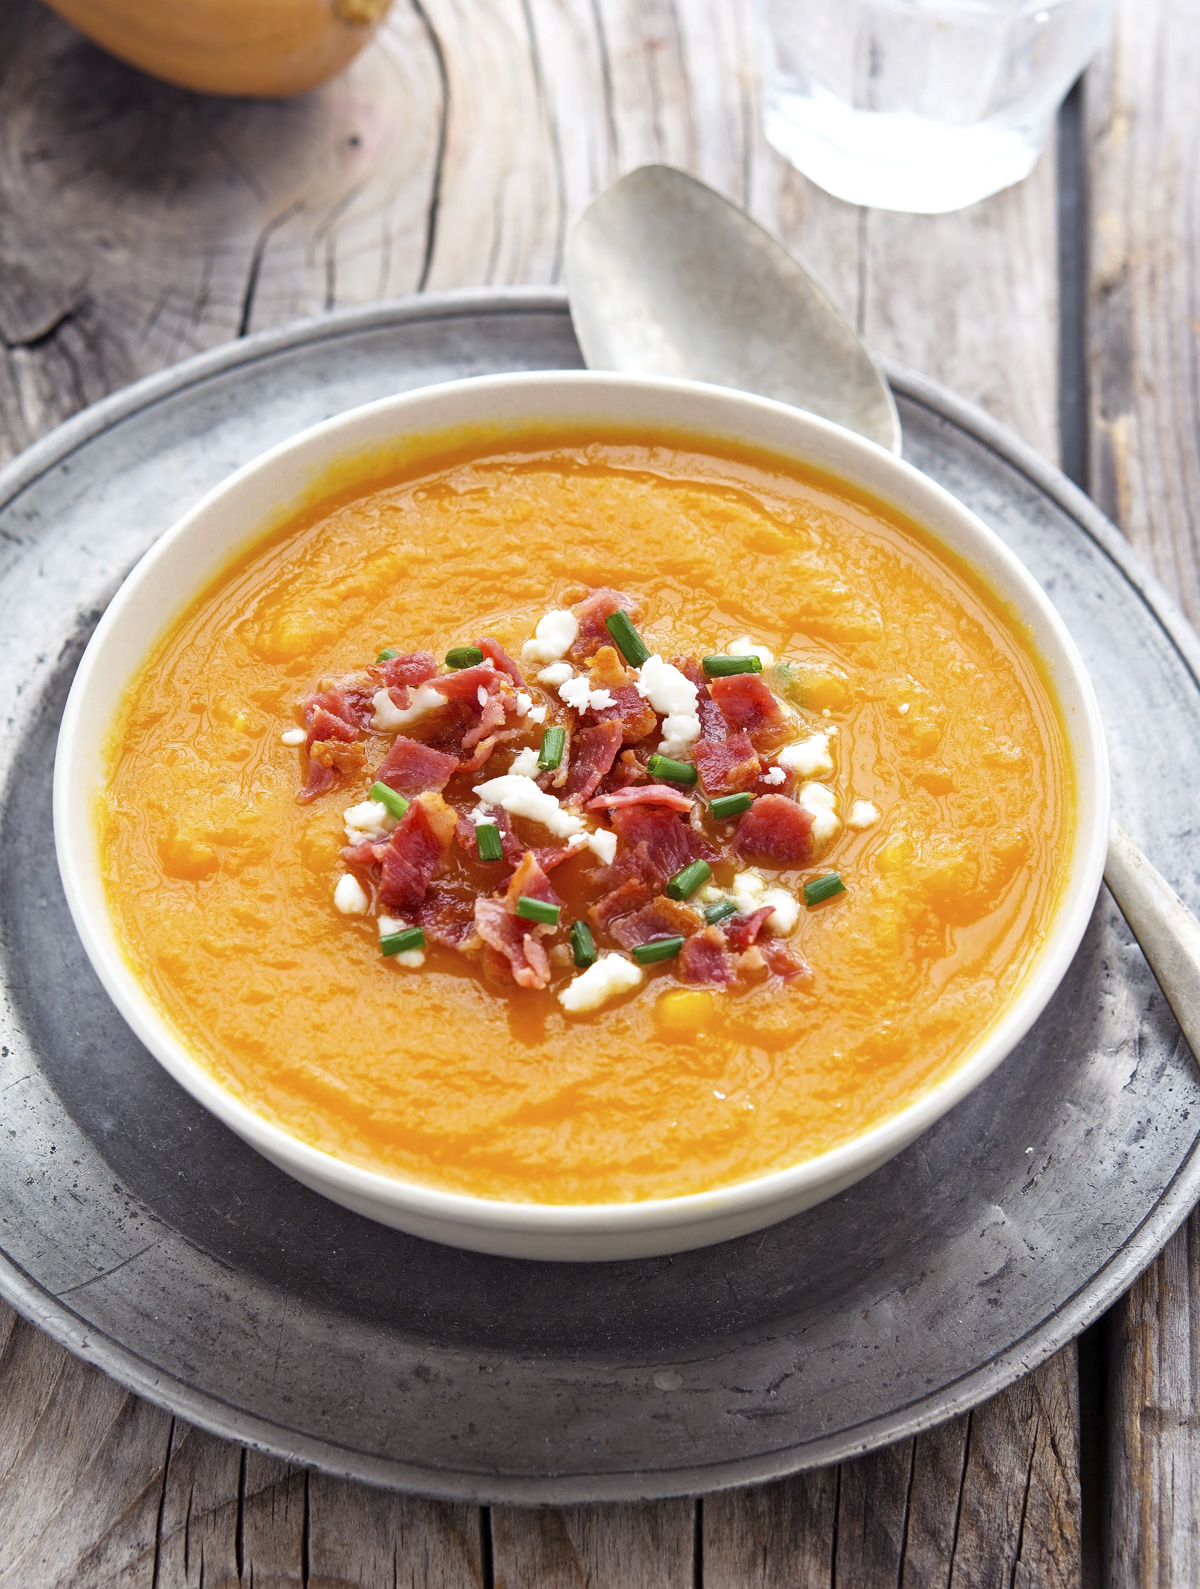 The Iron You: Roasted Butternut Squash and Bacon Soup